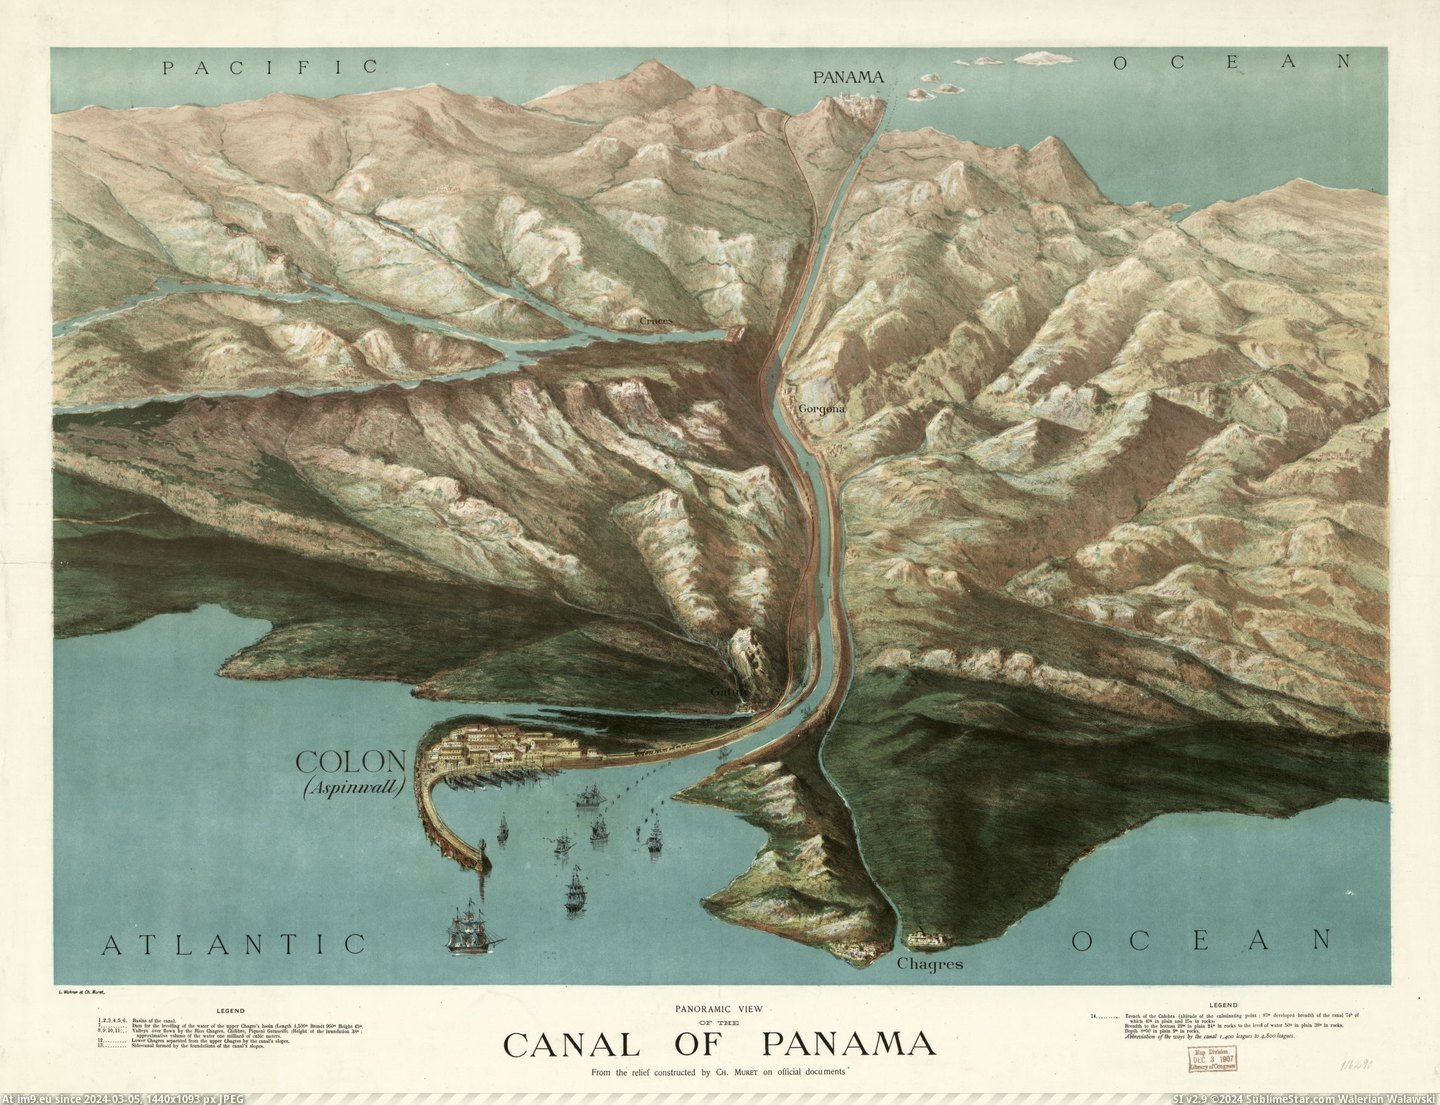 #Panoramic #Panama #Constructed #Canal #Relief [Mapporn] Panoramic view of the canal of Panama, From the relief constructed by Ch. Muret - 1881 [2285x1746] Pic. (Image of album My r/MAPS favs))